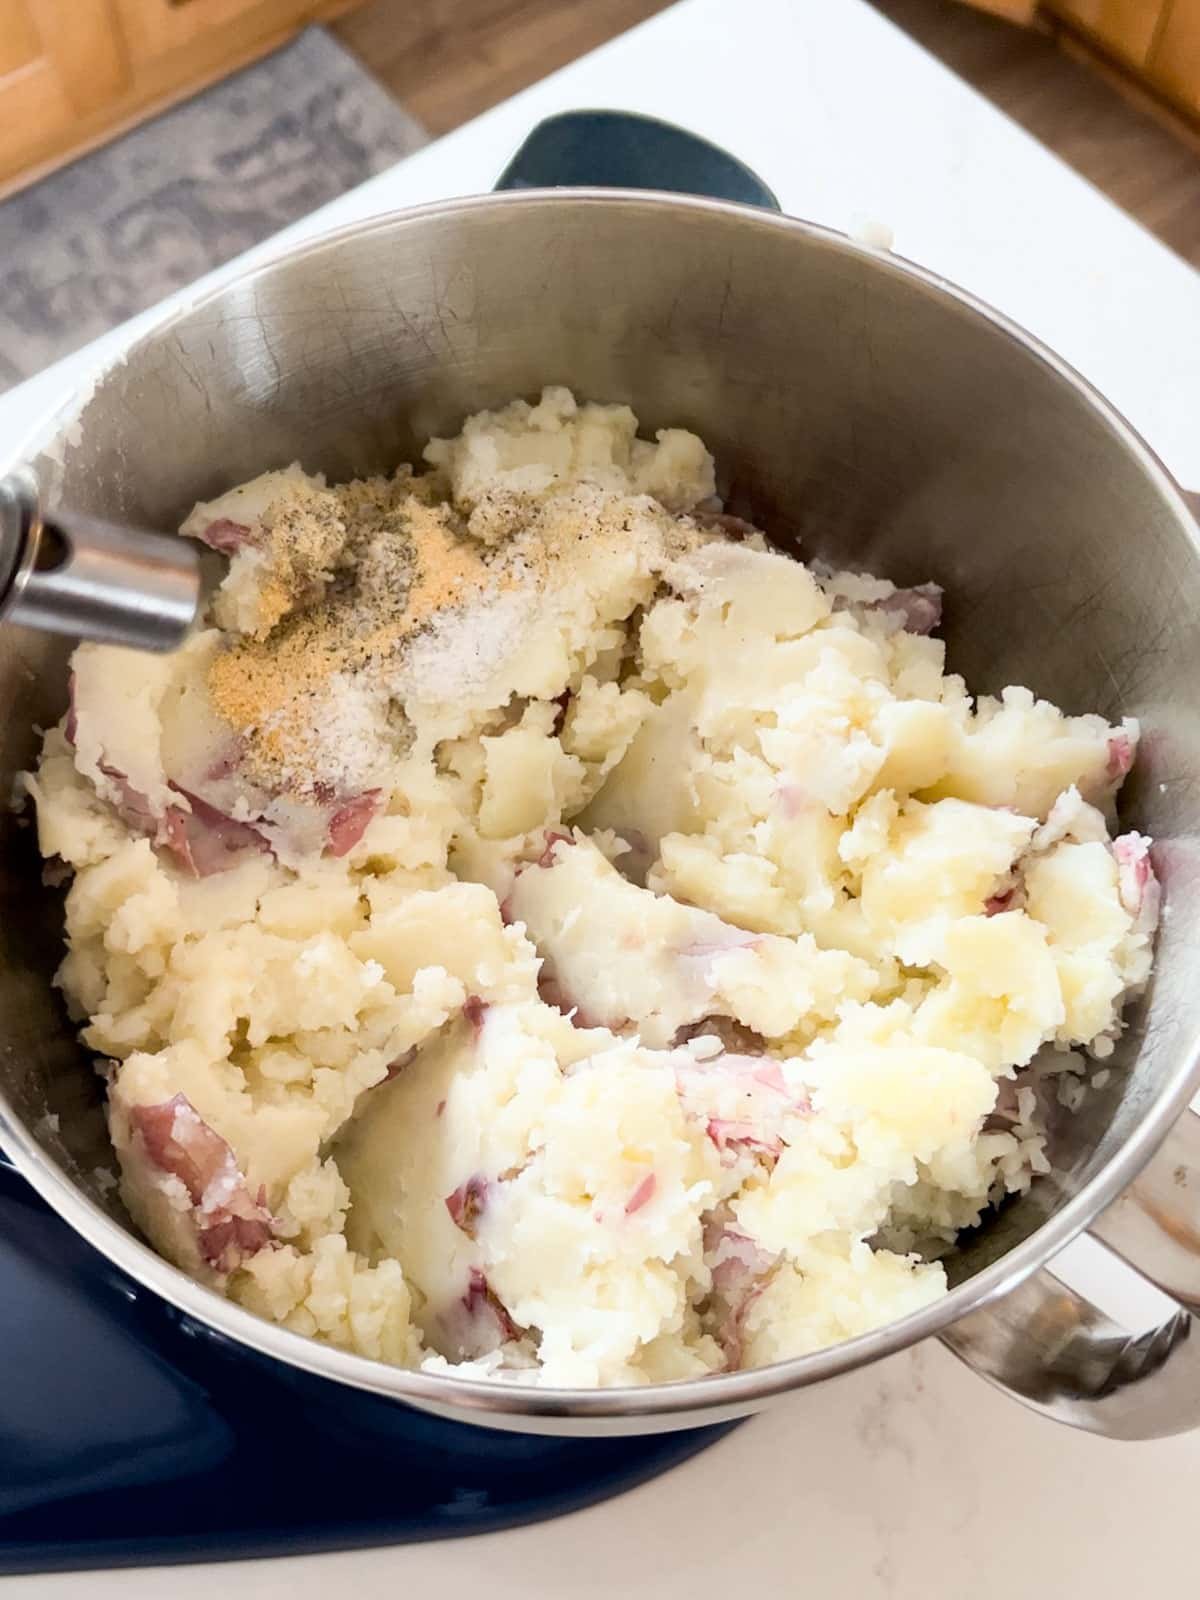 Partially mashed potatoes in stand mixer bowl with other ingredients ready to finish being mashed.